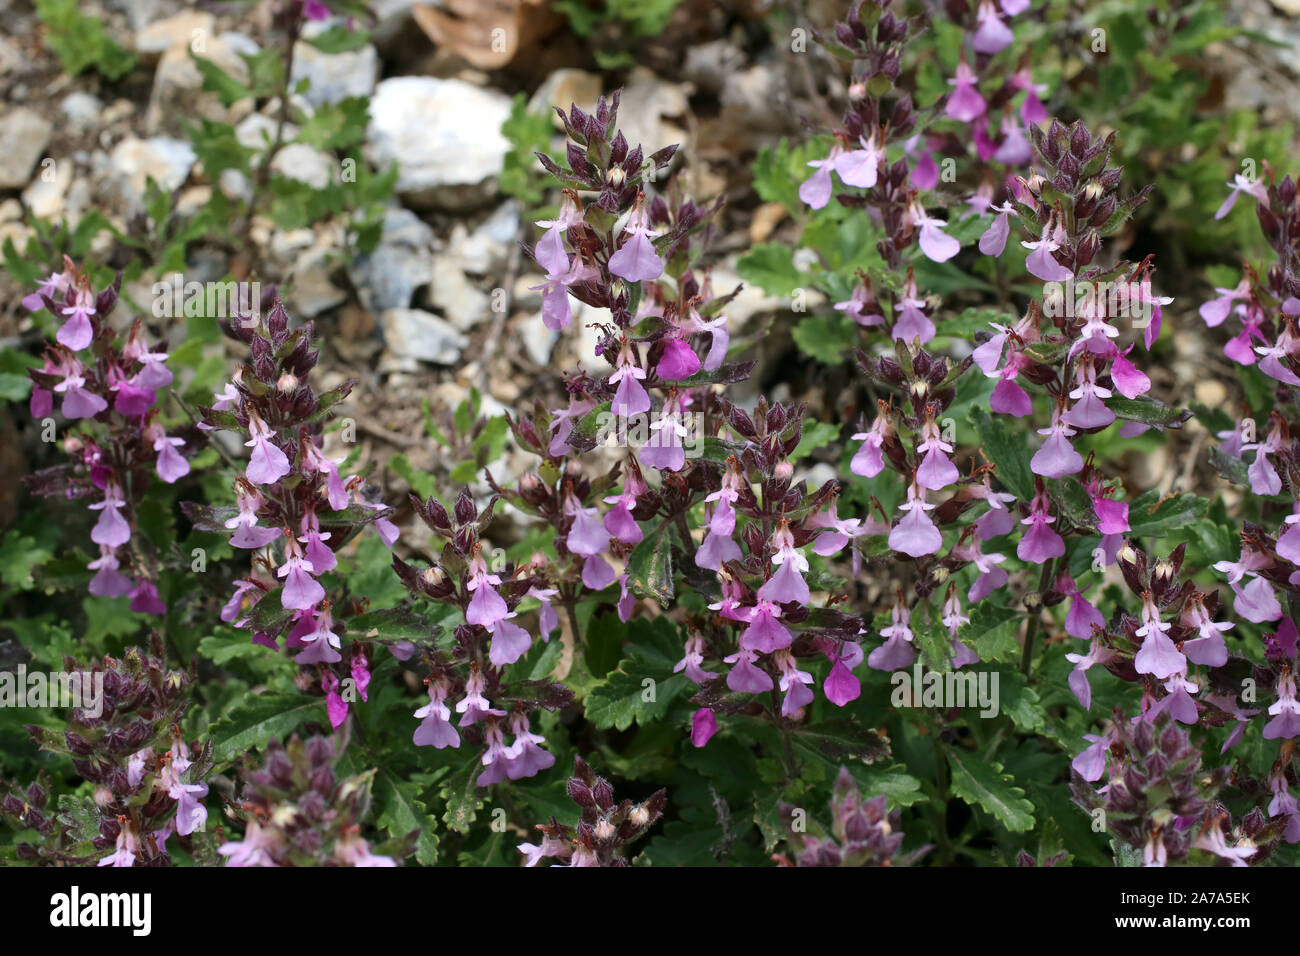 Teucrium chamaedrys - wild plant. Plant blooming in summer. Stock Photo